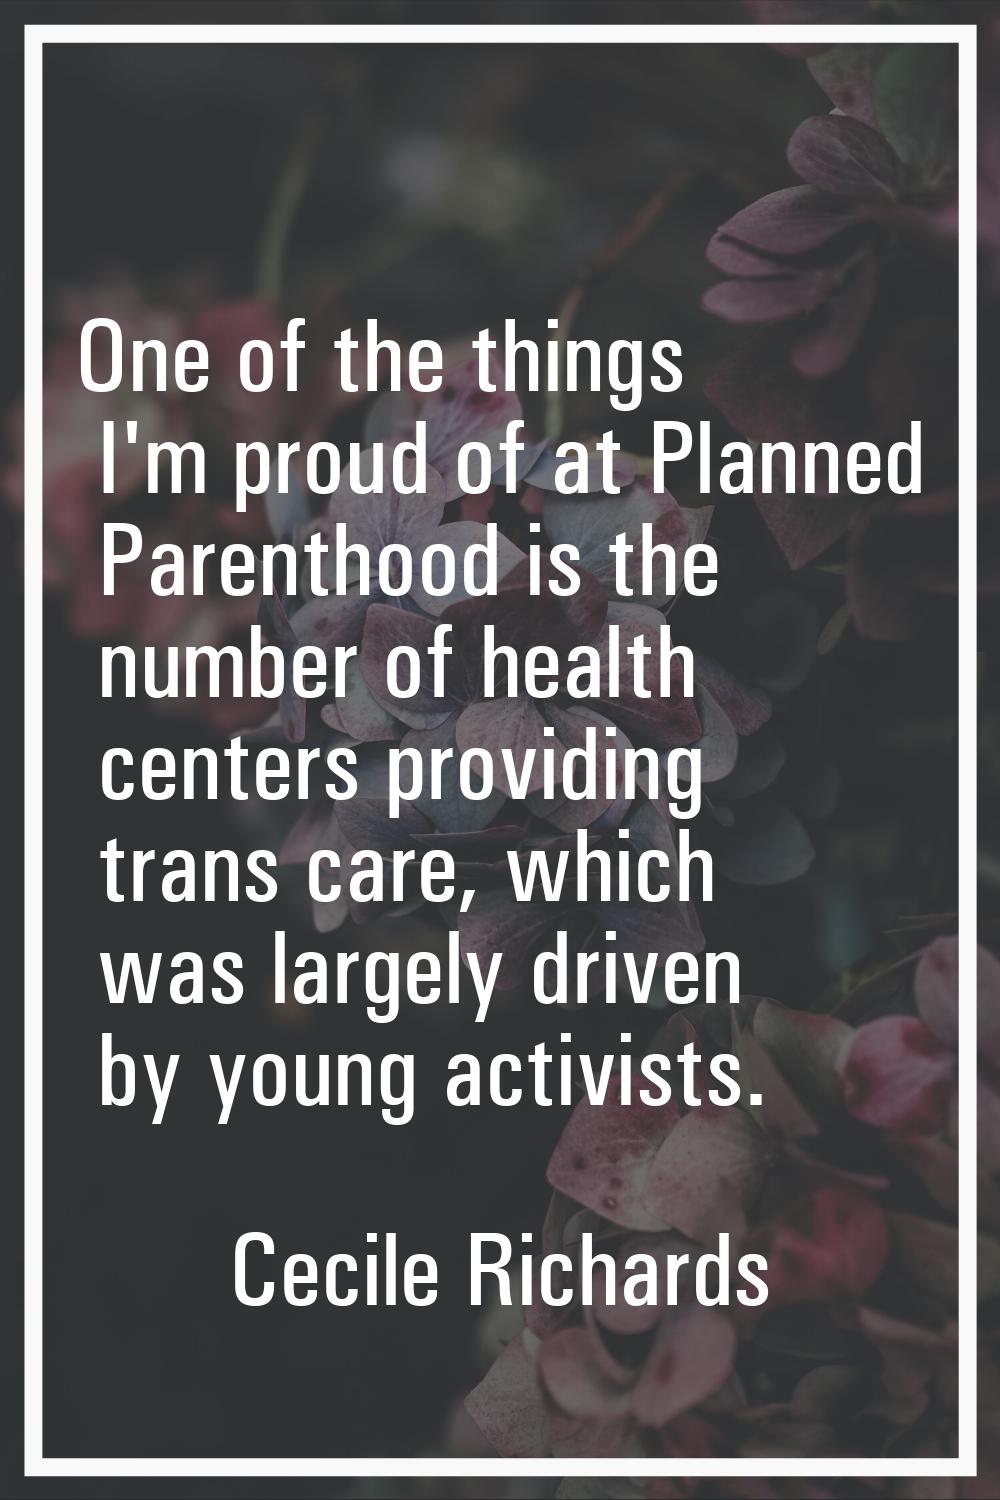 One of the things I'm proud of at Planned Parenthood is the number of health centers providing tran